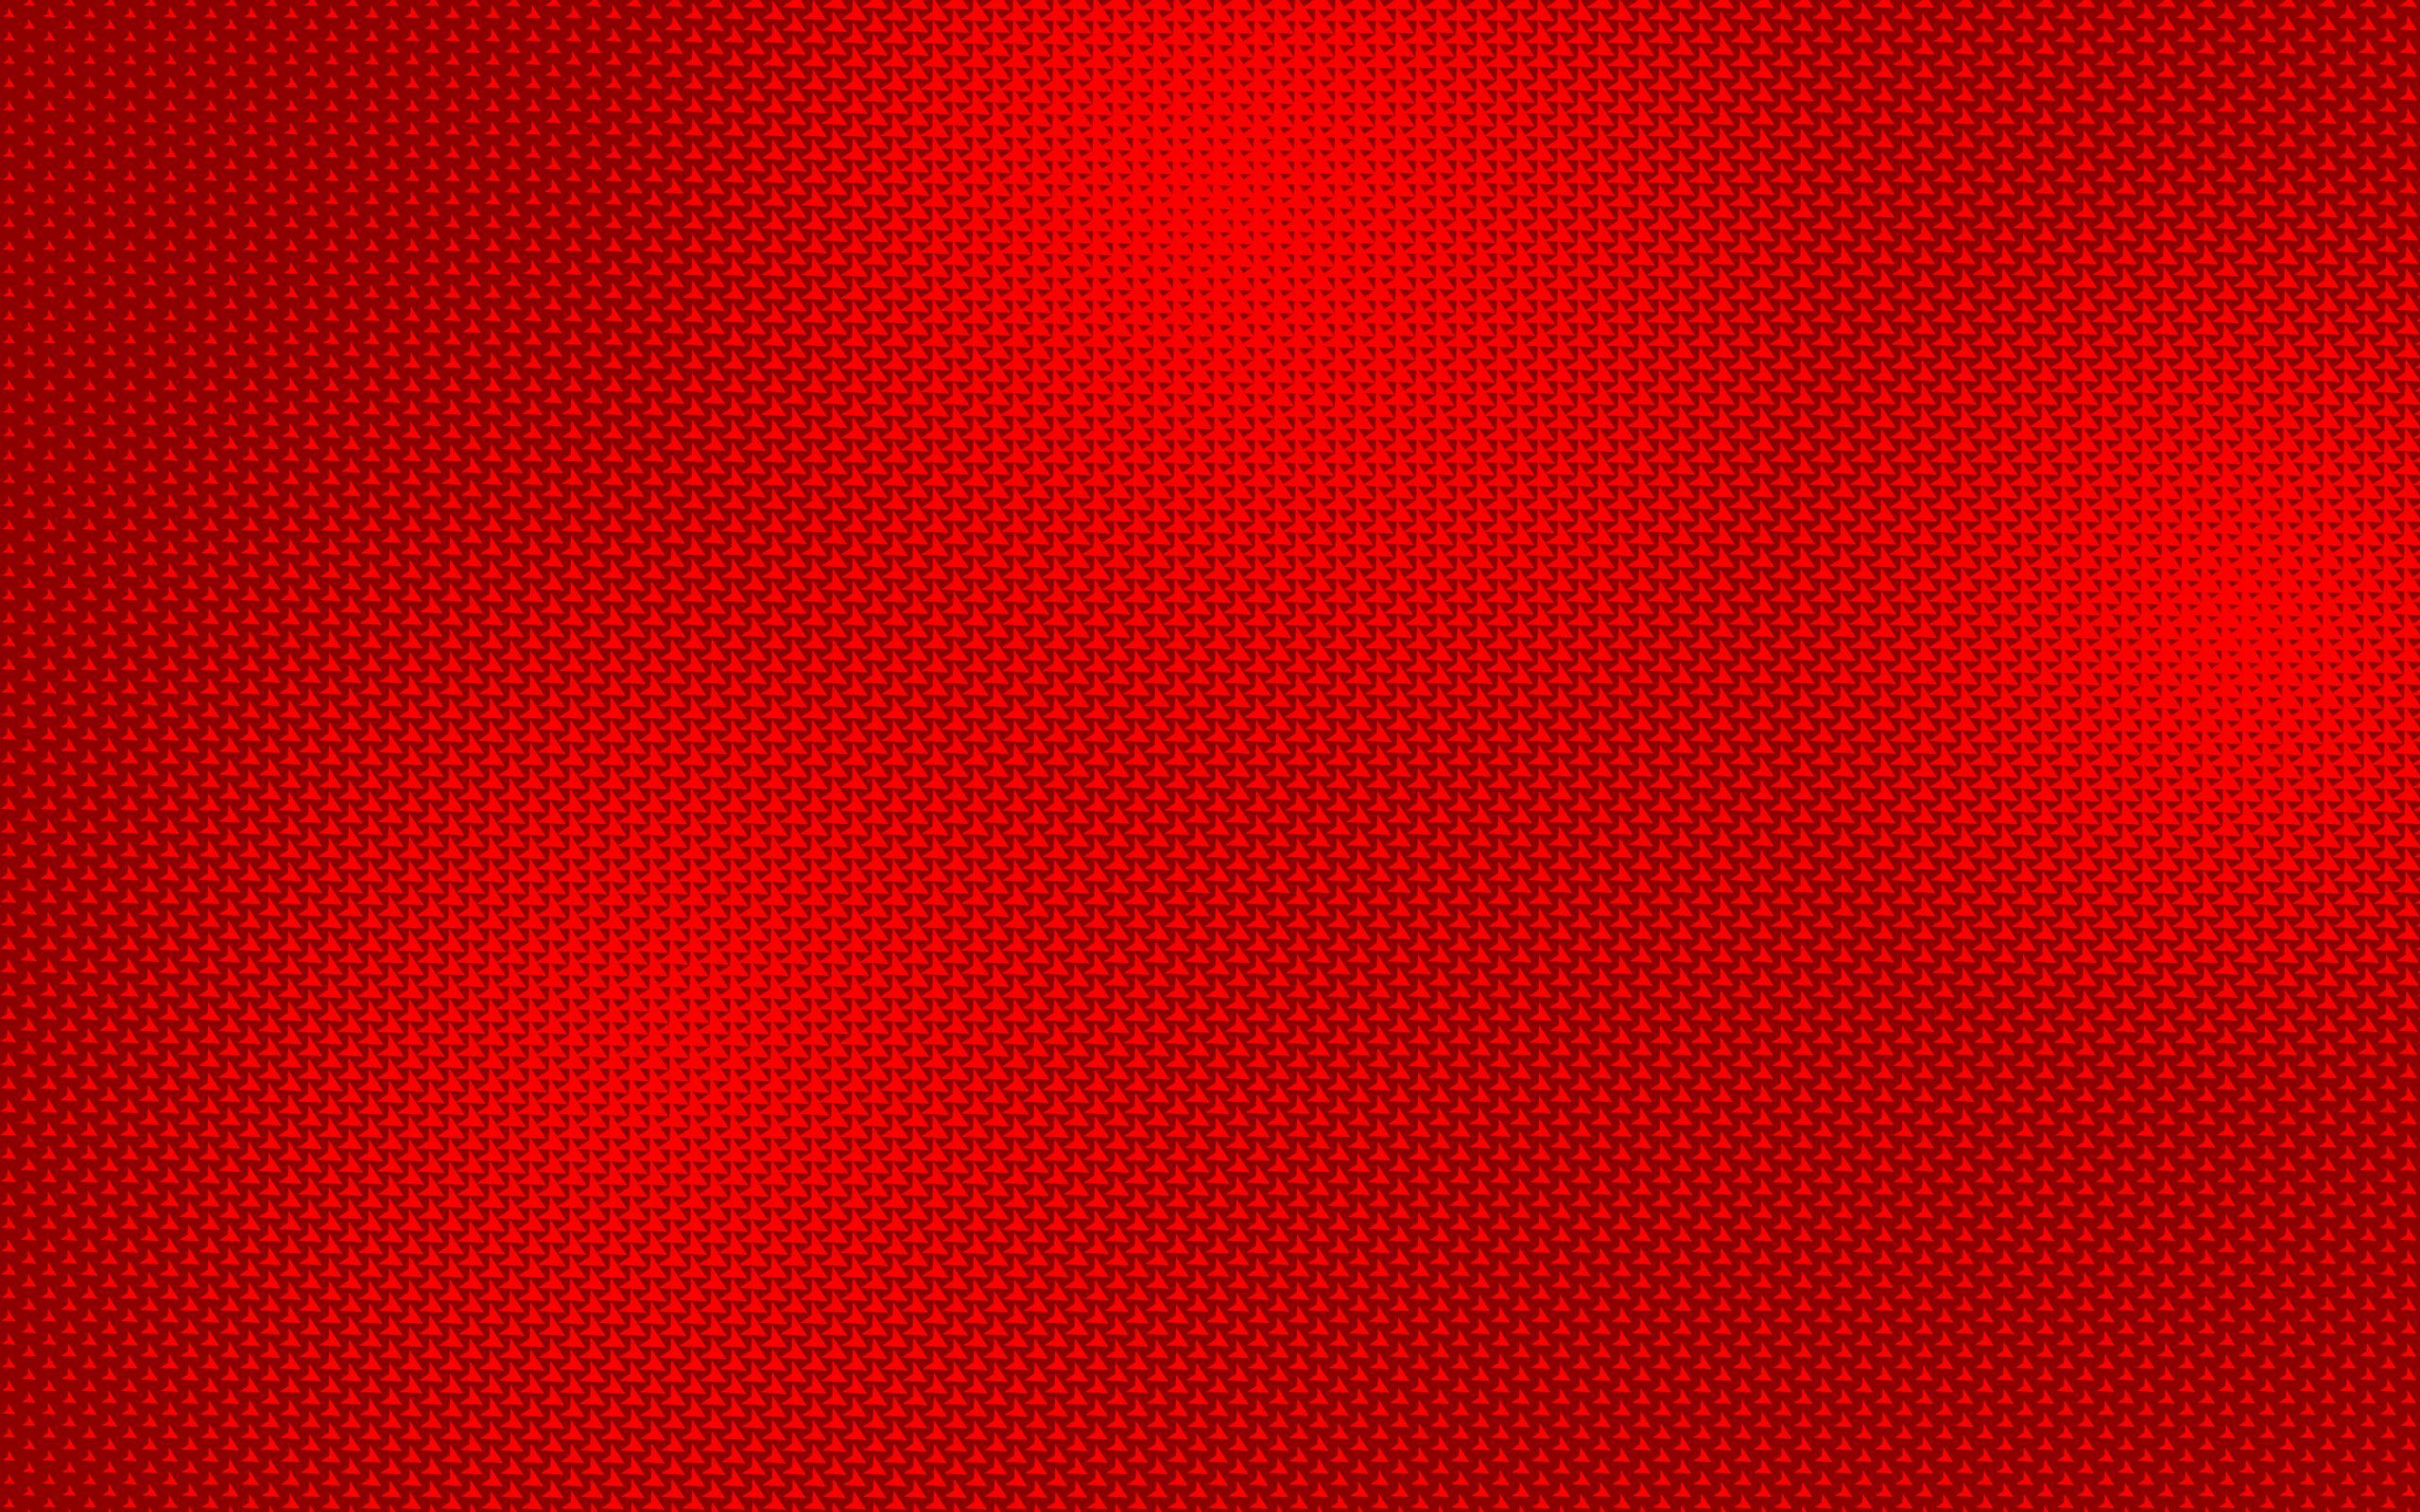 Download wallpaper 2560x1600 patterns, halftone, geometric, red widescreen 16:10 HD background